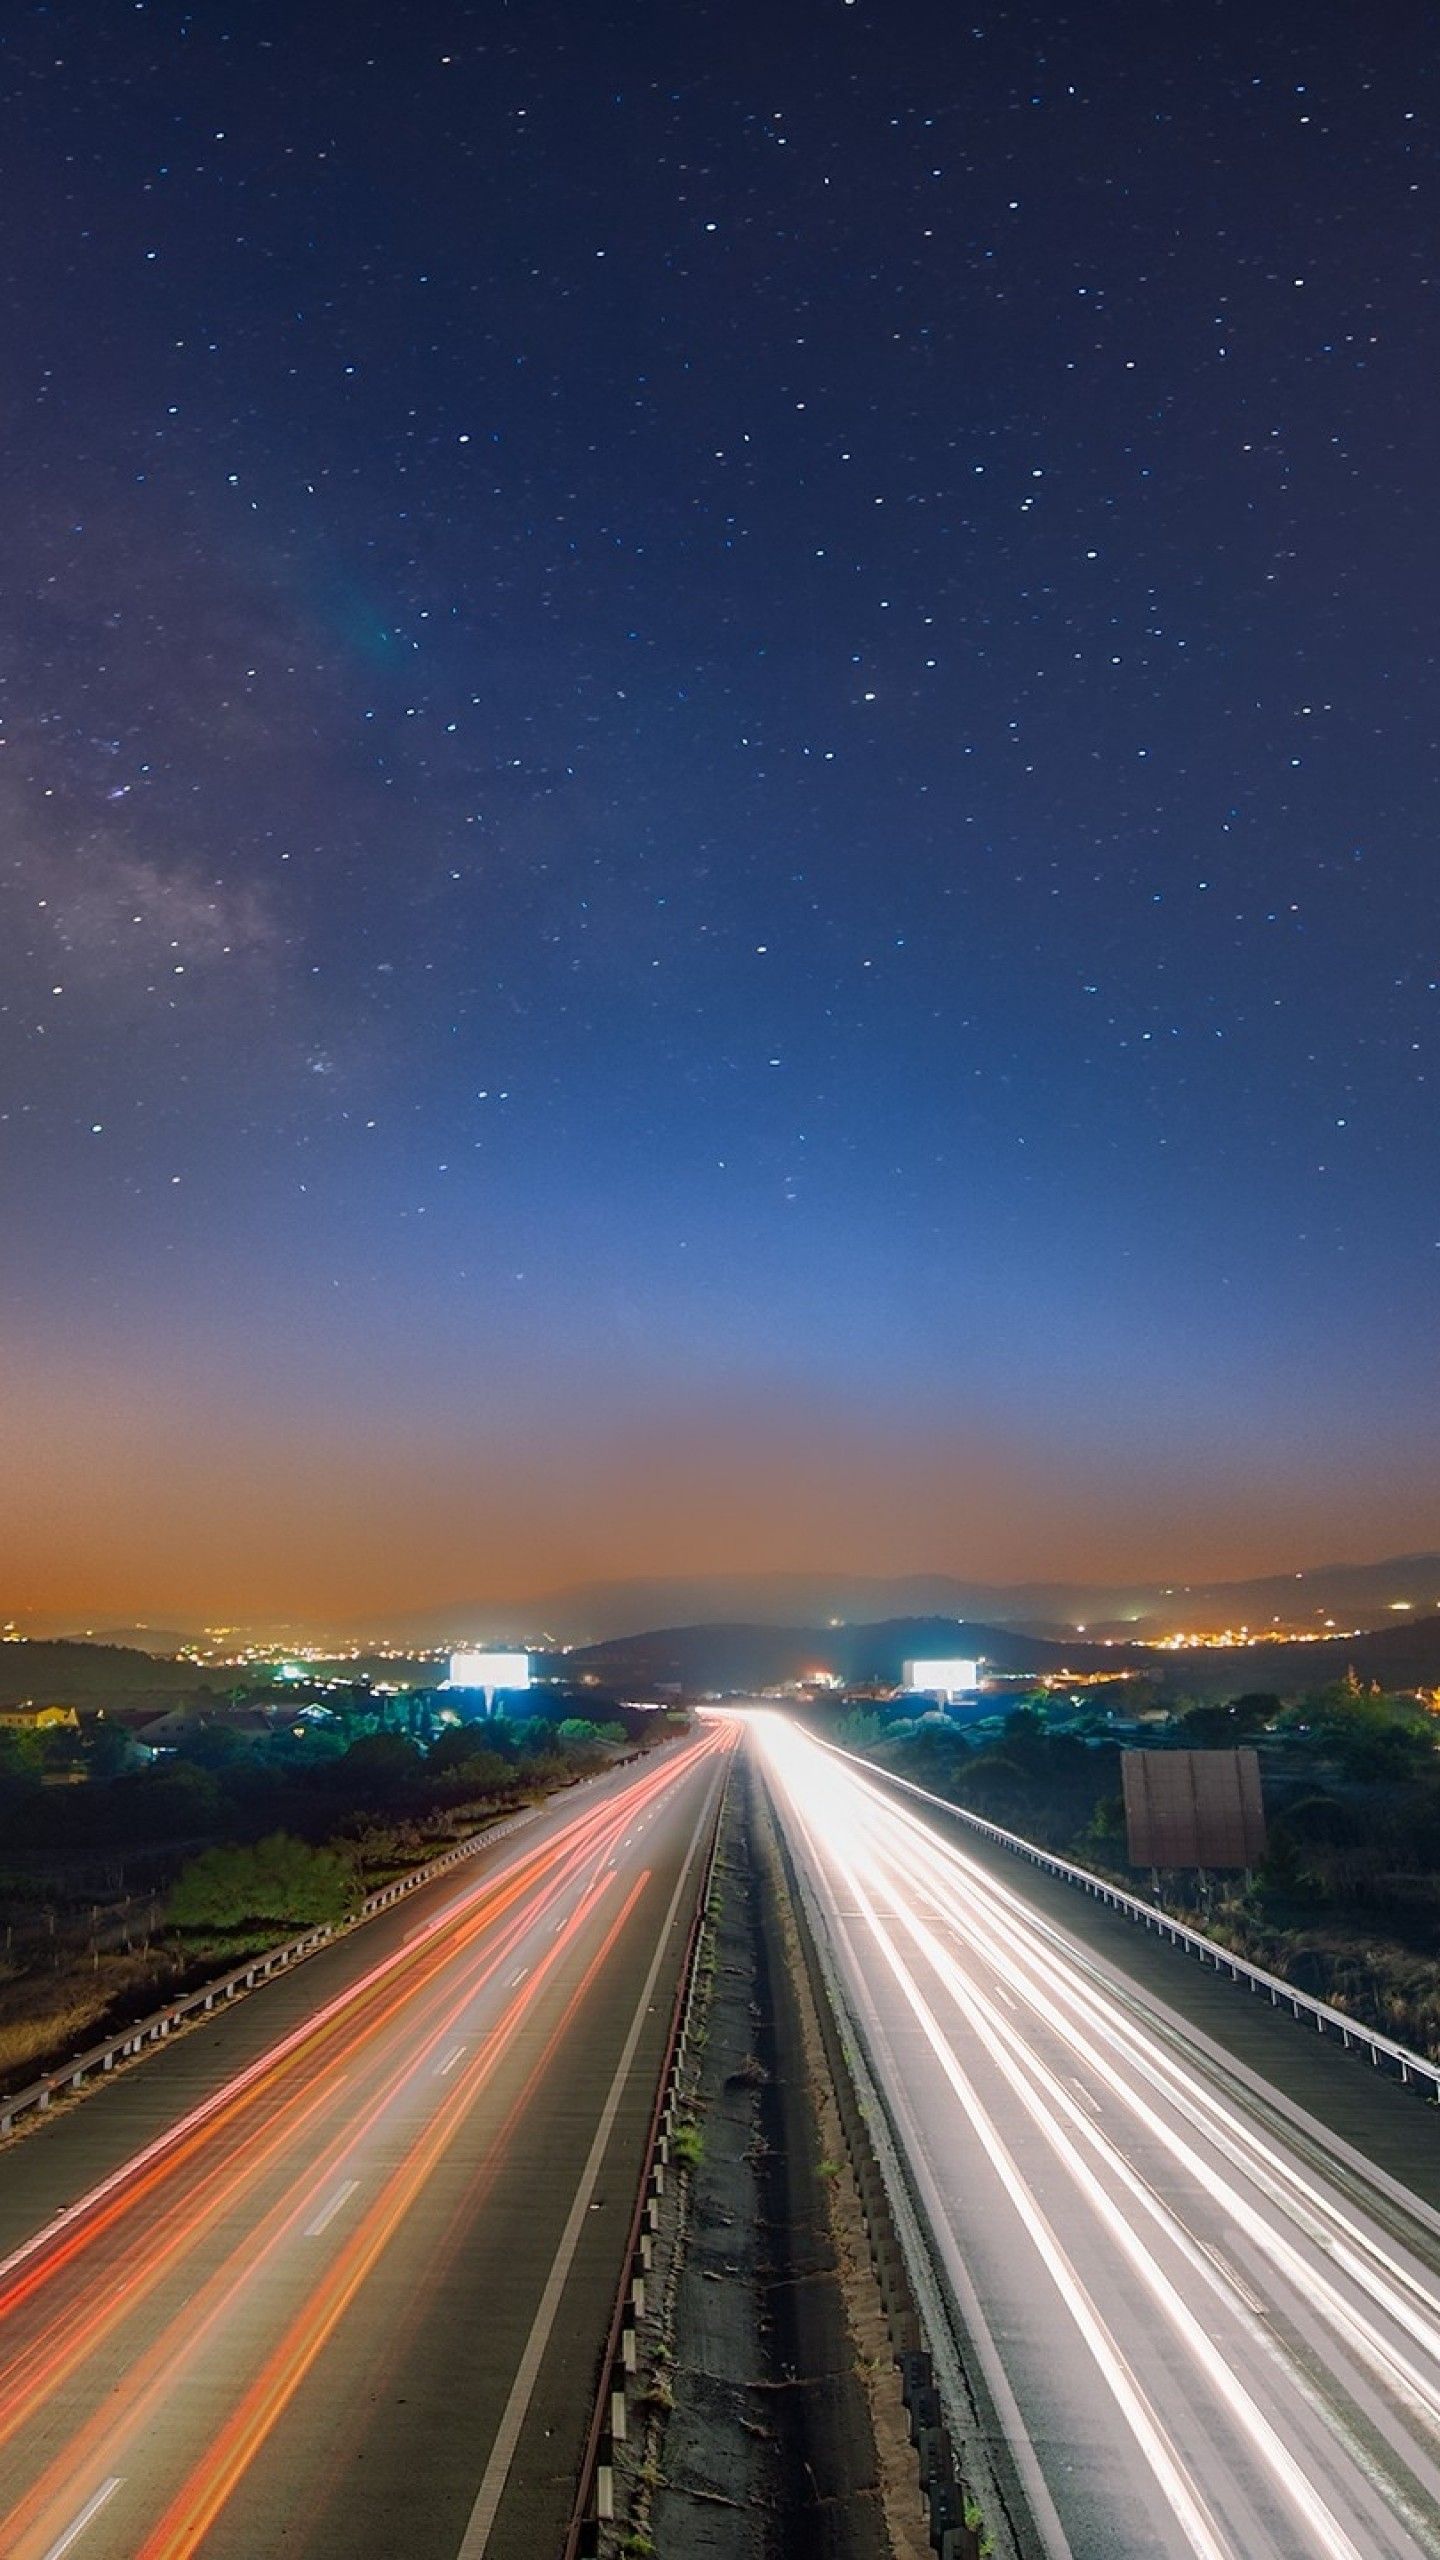 A highway with cars driving on it at night - Road